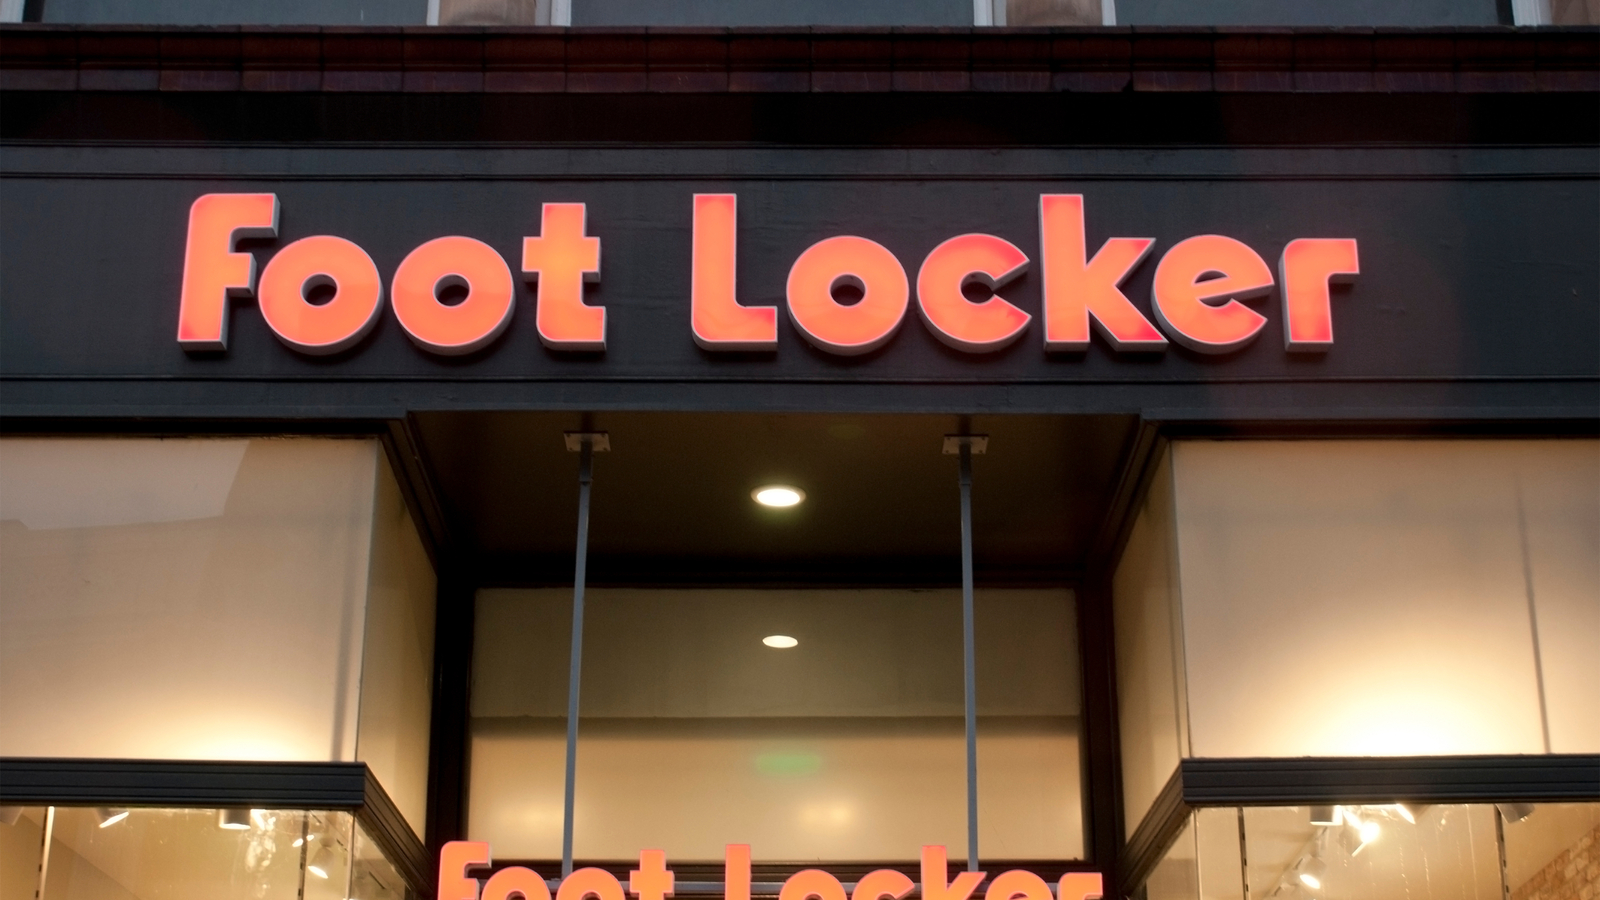 Foot Locker (FL Stock) storefront sign in a city